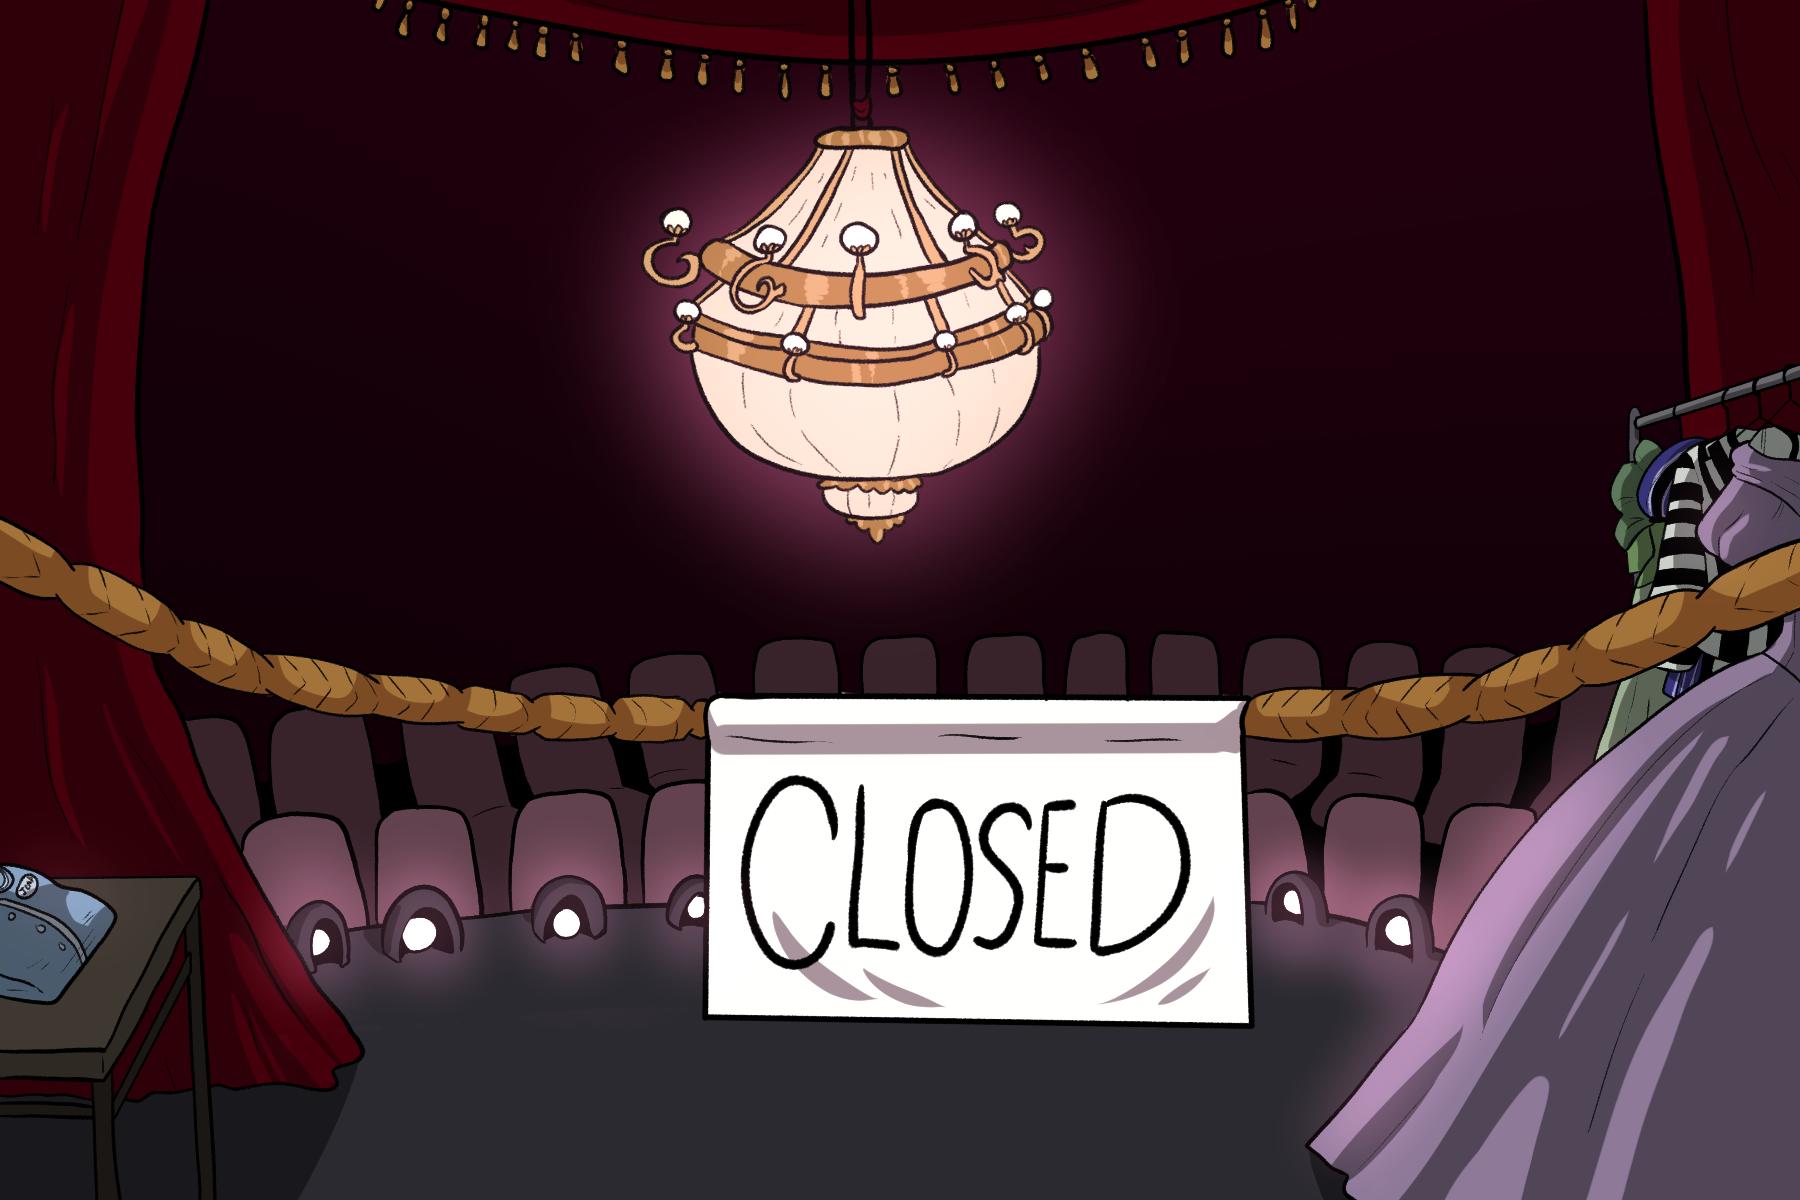 In an article about the recent theater closure. a chandelier shines in center in front of an empty theater. The words "closed" are written on a sheeet.